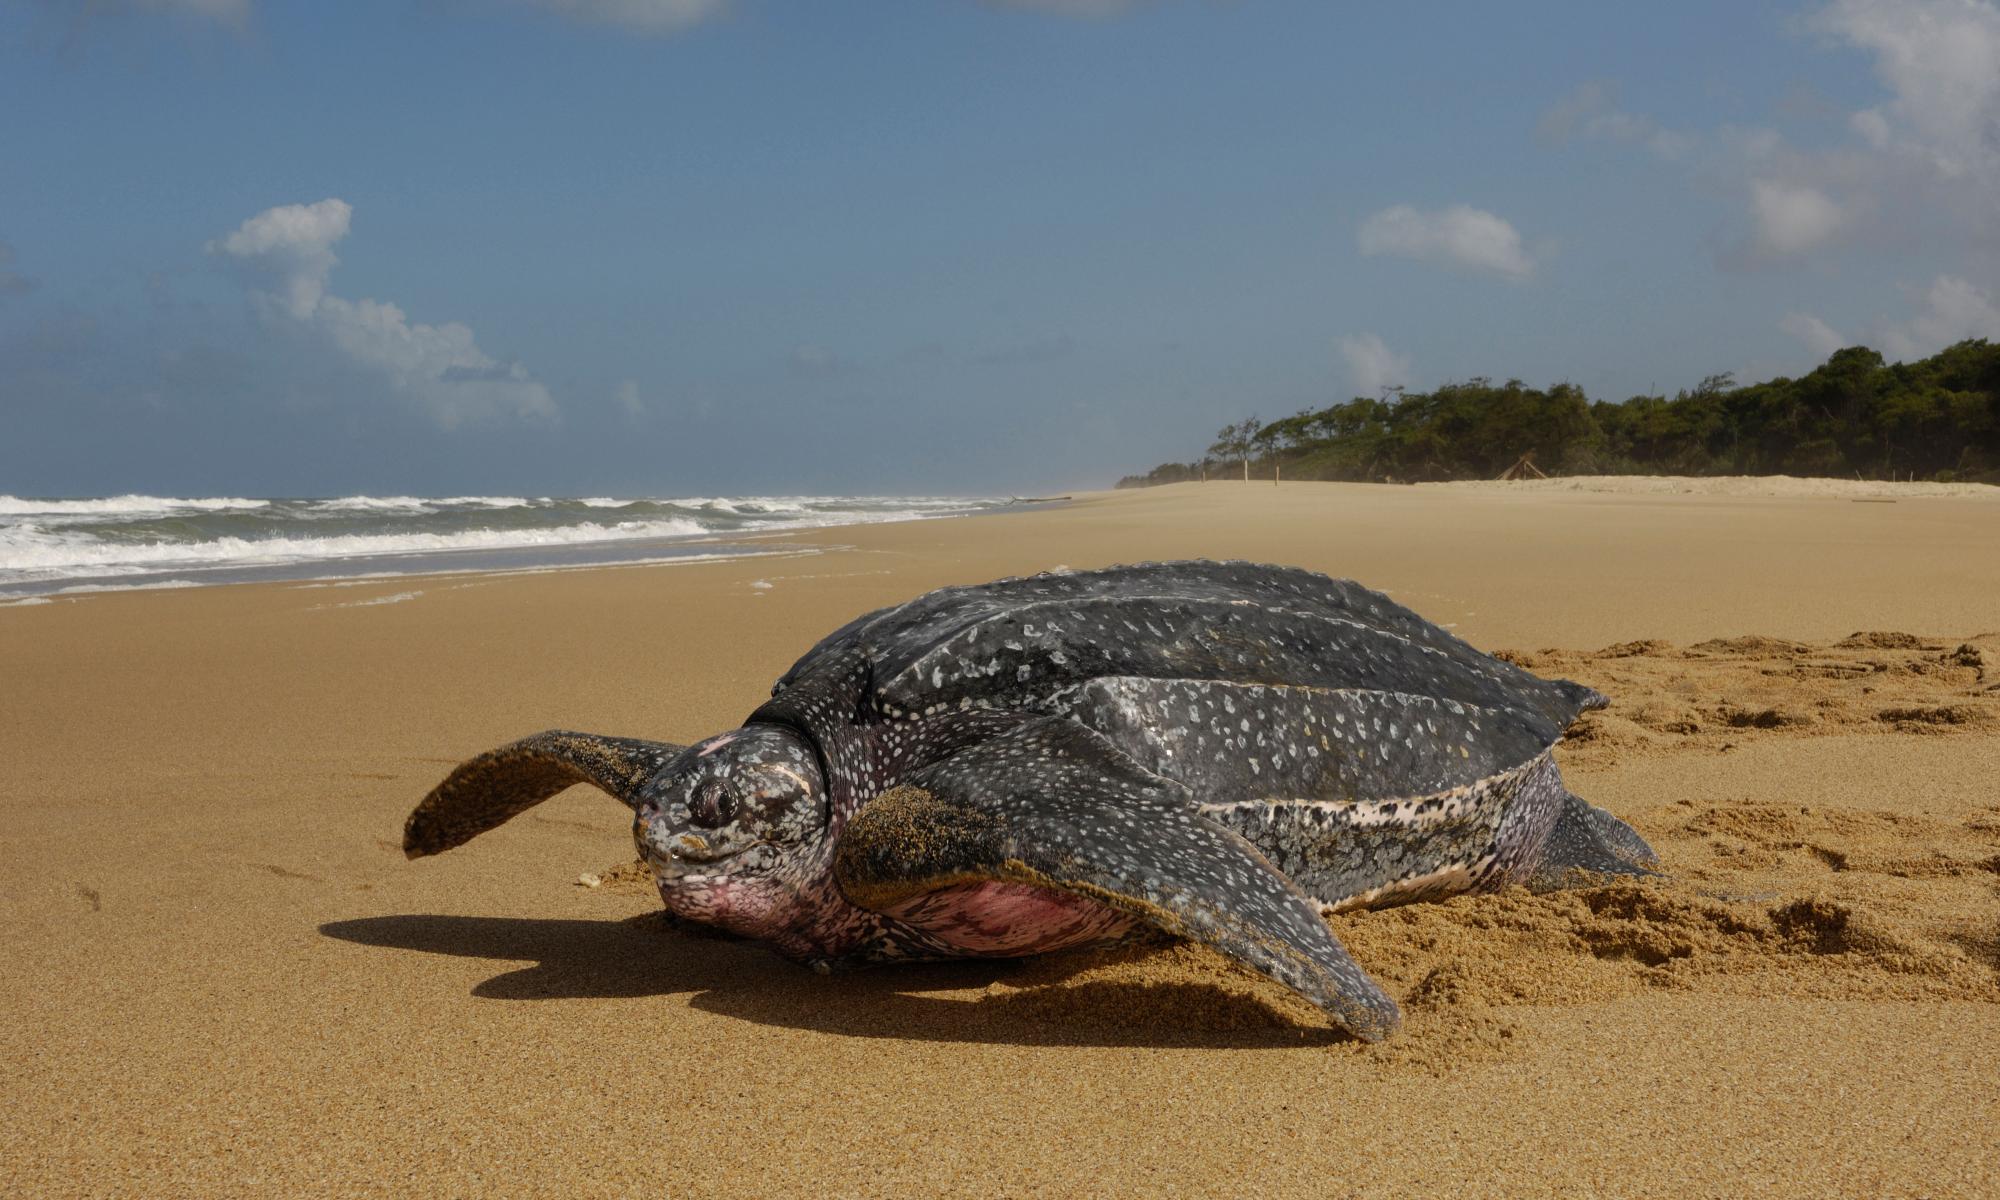 Warming oceans force leatherback turtles on longer journeys to feed